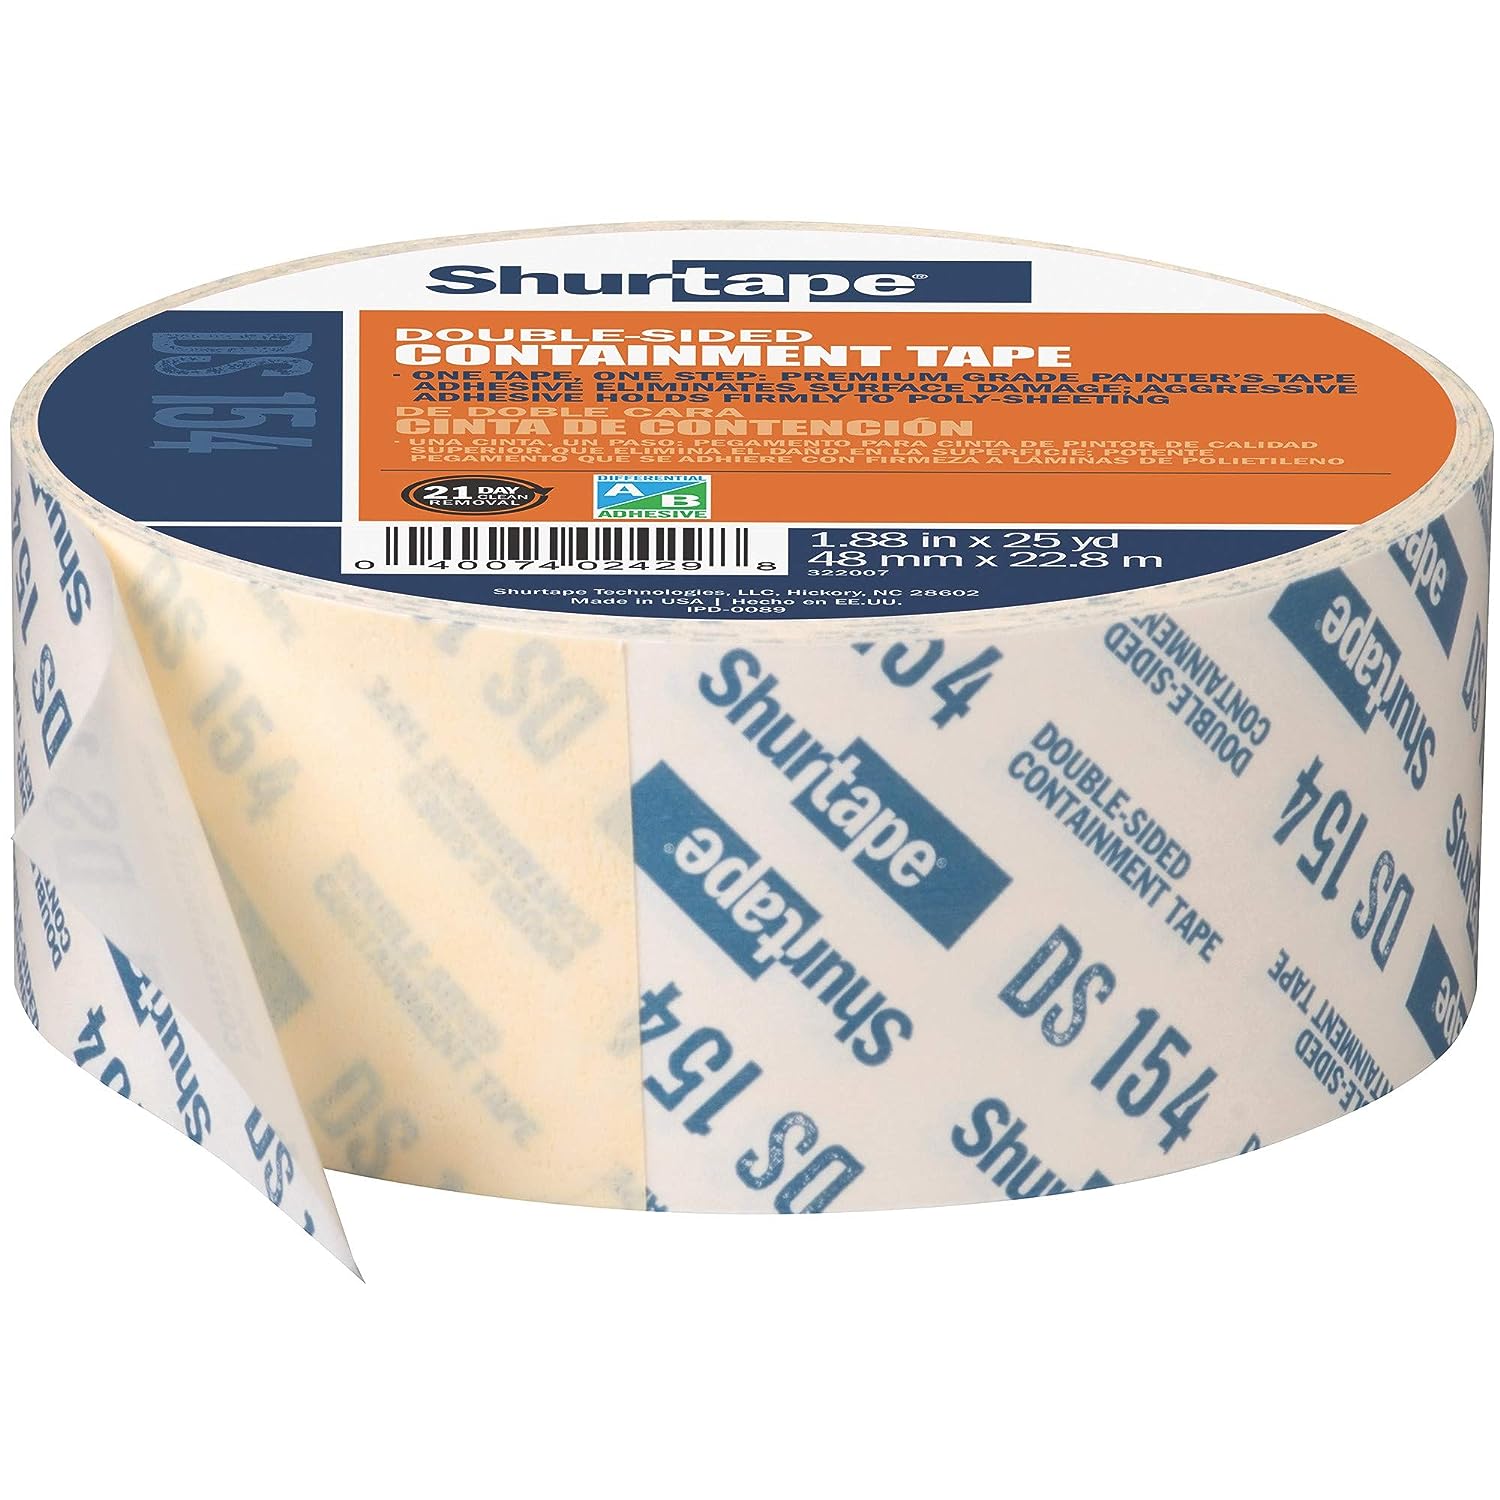 Shurtape DS 154 Double-Sided Containment Tape, [...]